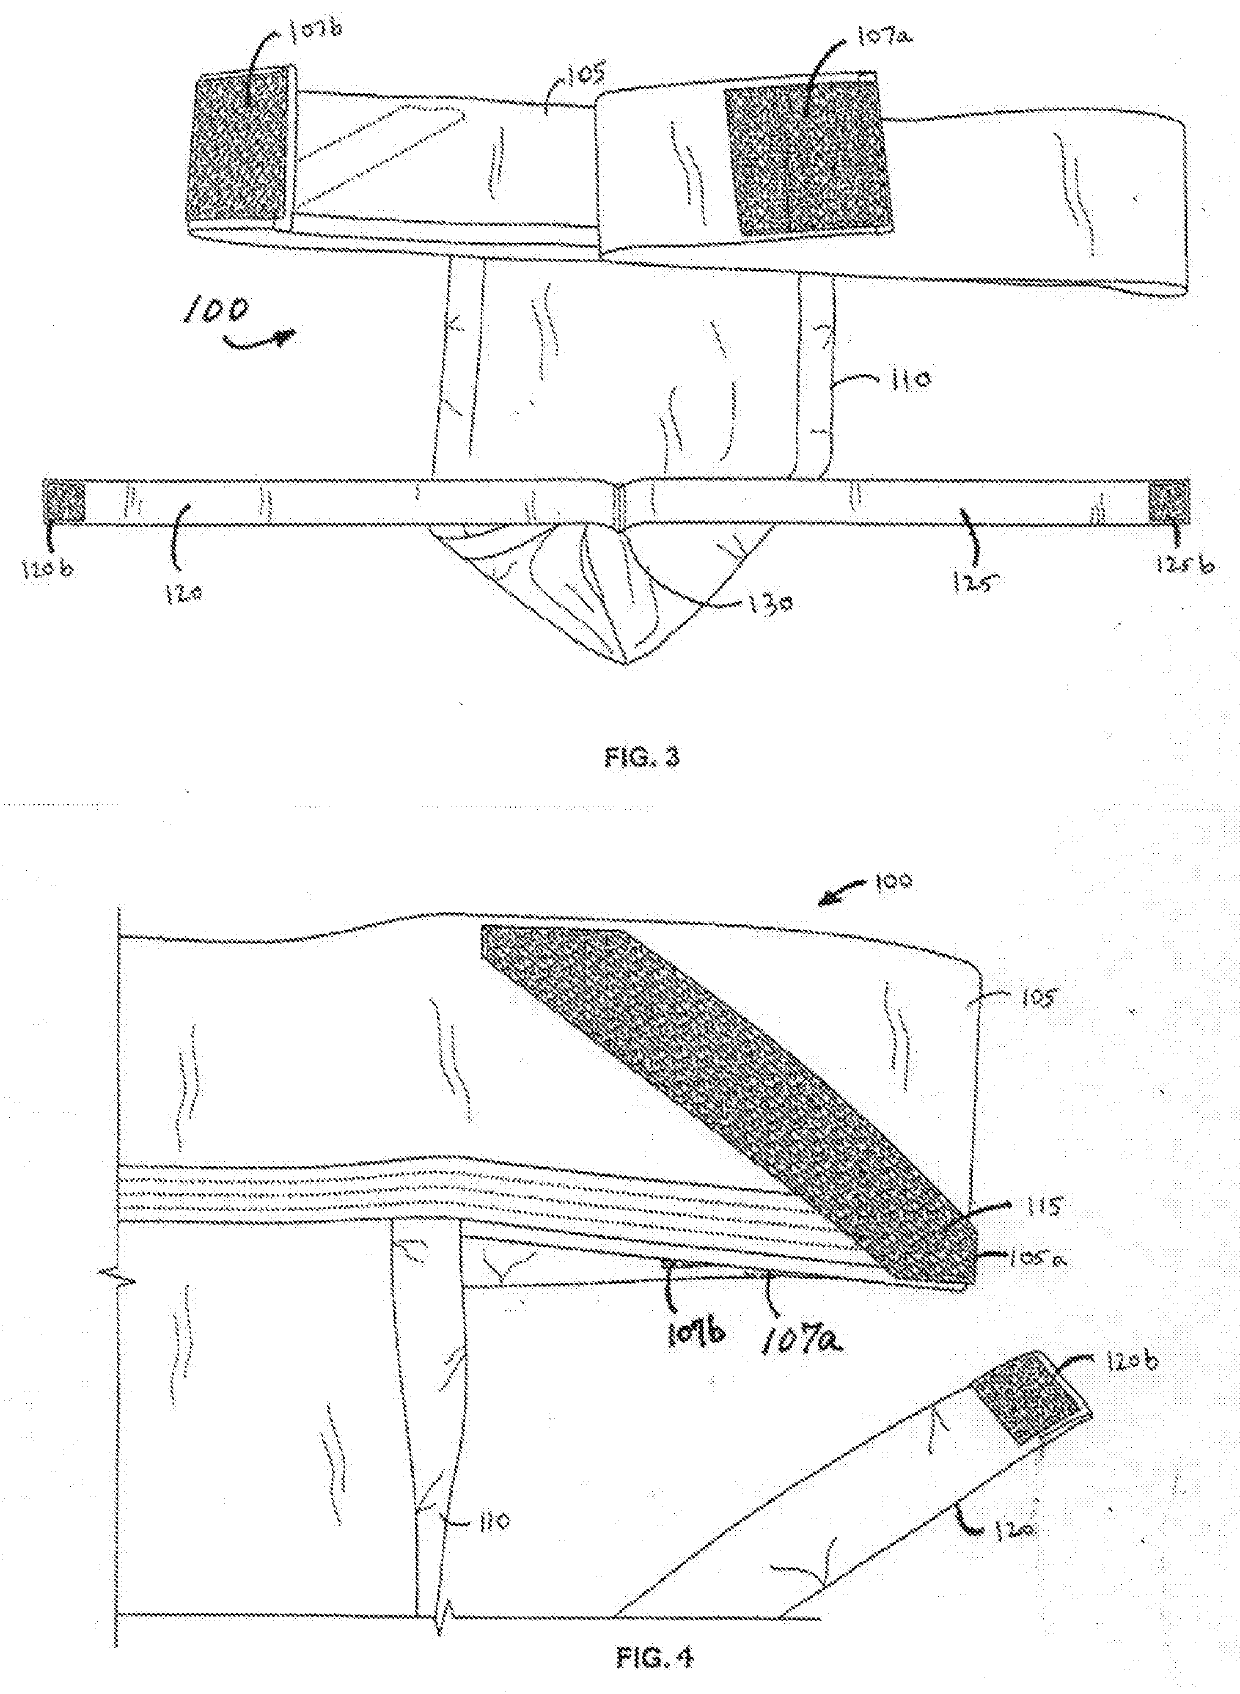 Unisex Pelvic Groin Support Garment With Adjustable Pouch, Waist Belt, And Straps Apparatus, And A Method of Using Same